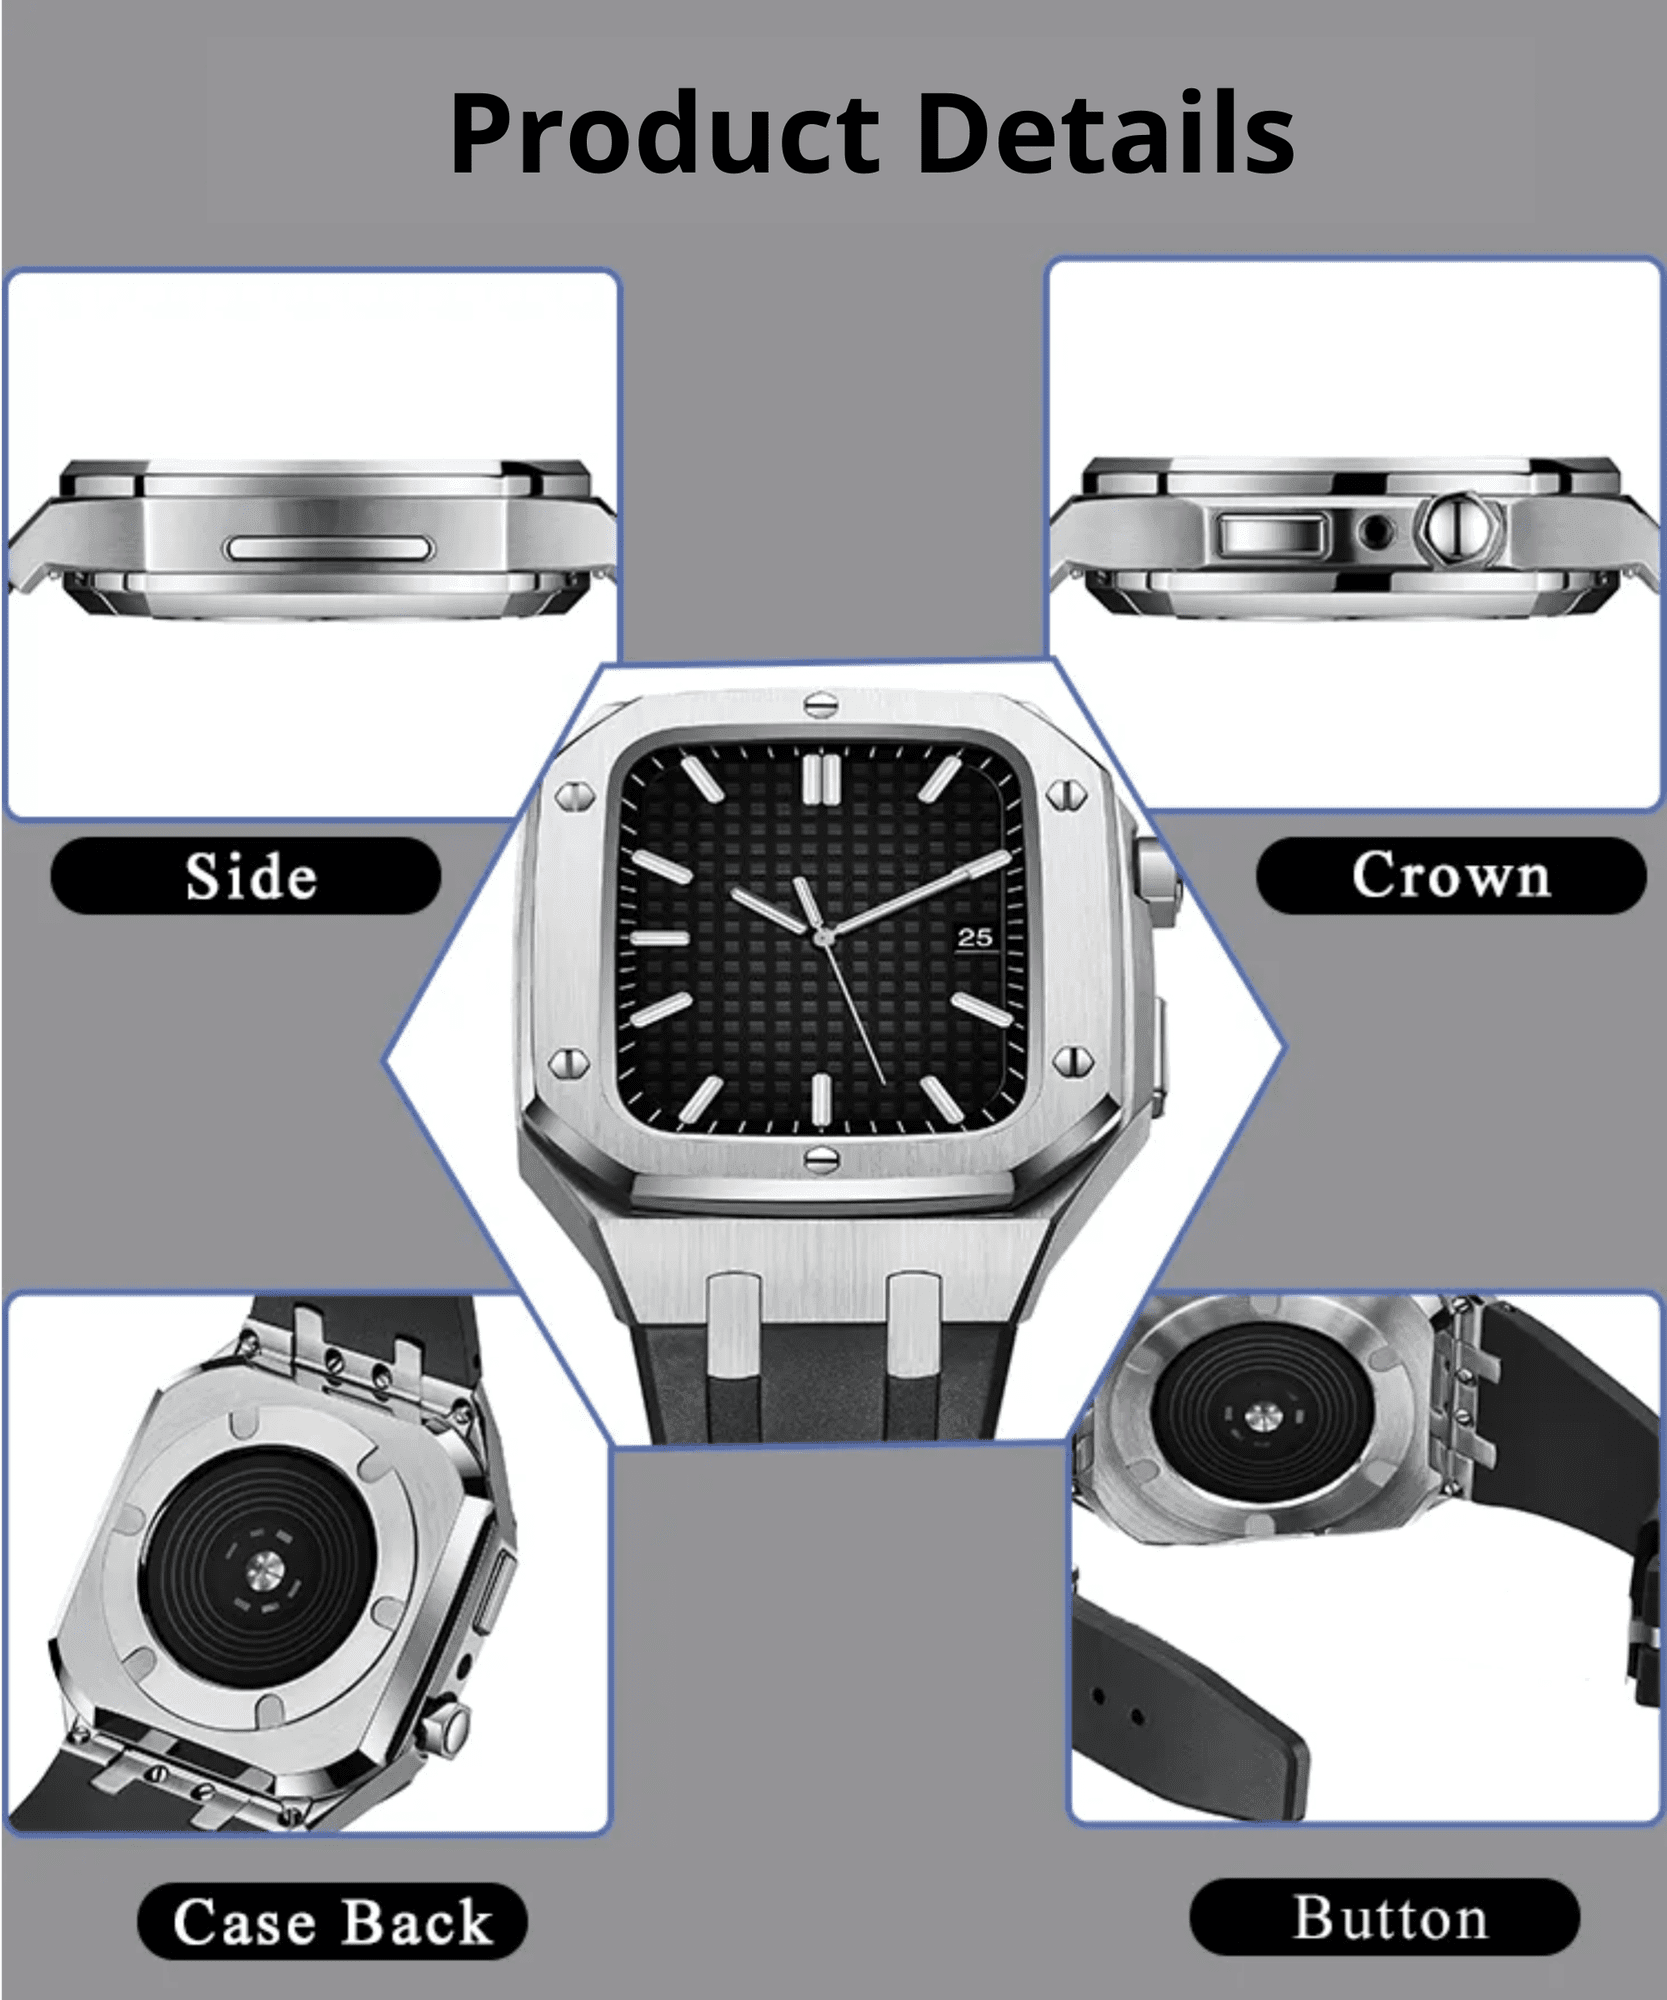 Luxury Metal Mod Kit for Apple Watch | Leather & Stainless Steel Straps | Apple Watch SE/3/4/5/6/7/8 accessory 44 mm| Silver Case - Black Band mod kits india dream watches apple watch